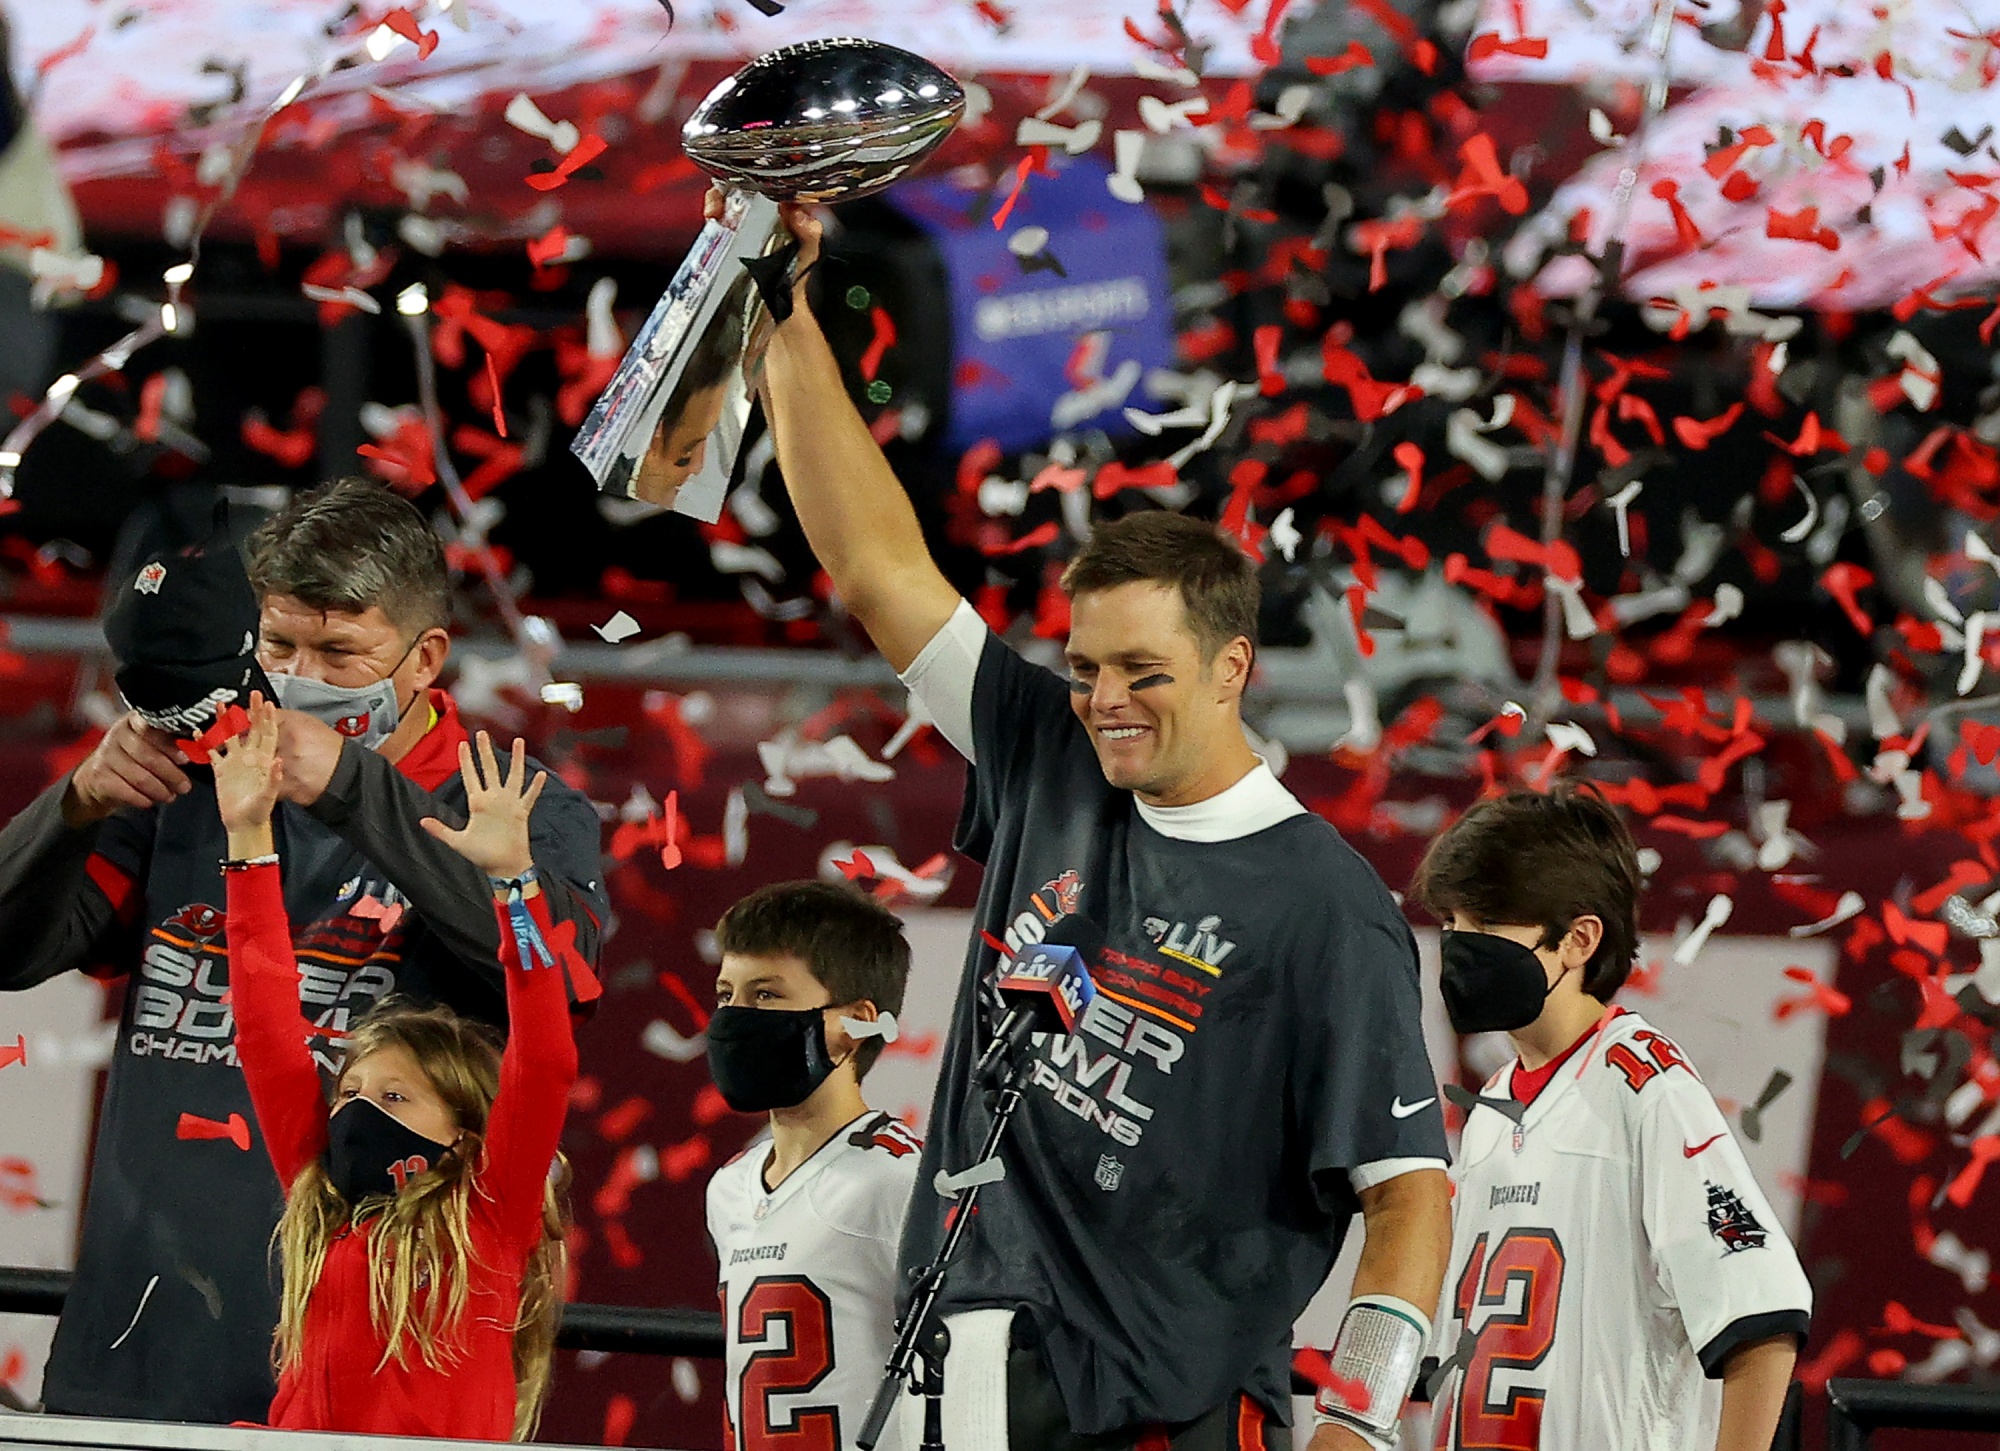 Tom Brady #12 of the Tampa Bay Buccaneers celebrates with the Lombardi Trophy after defeating the Kansas City Chiefs in Super Bowl LV at Raymond James Stadium in Tampa, Florida, on Feb. 7.